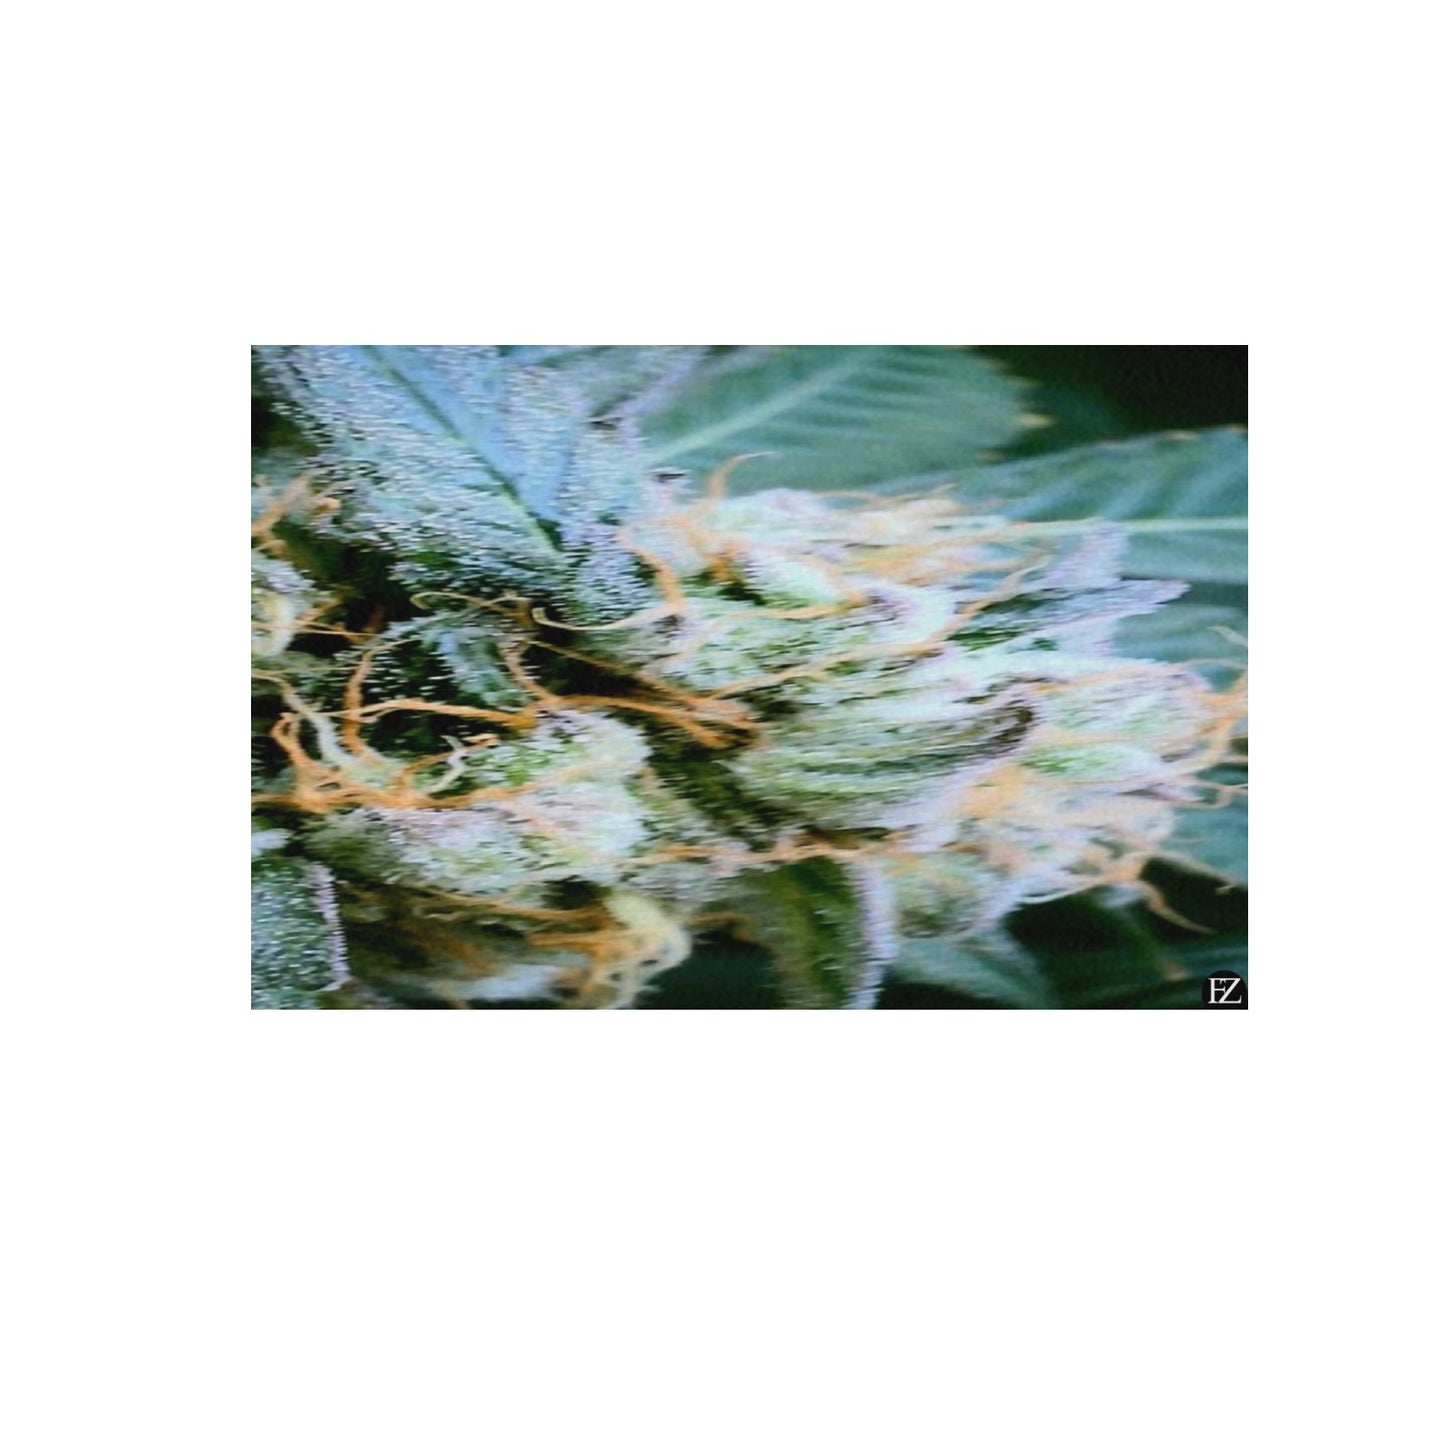 fz weed one portrait upgraded frame canvas print 48"x32"(made in queen)